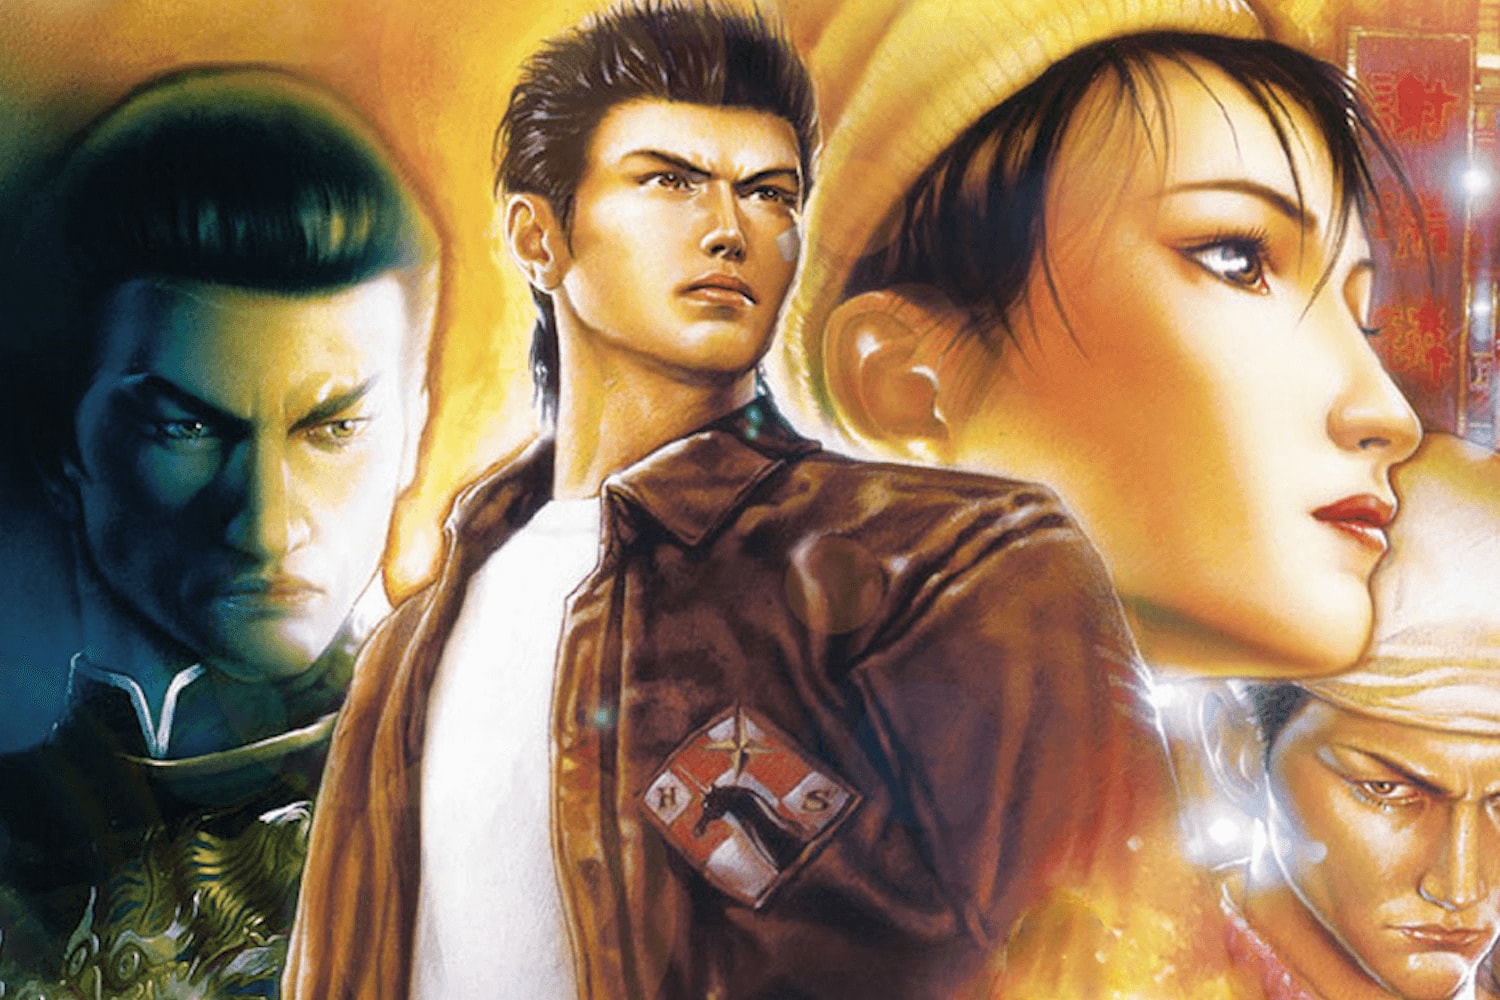 Shenmue 1 2 i ii port xbox one playstation ps4 pc computer sega fes announce news trailer re-release graphics japanese english voice